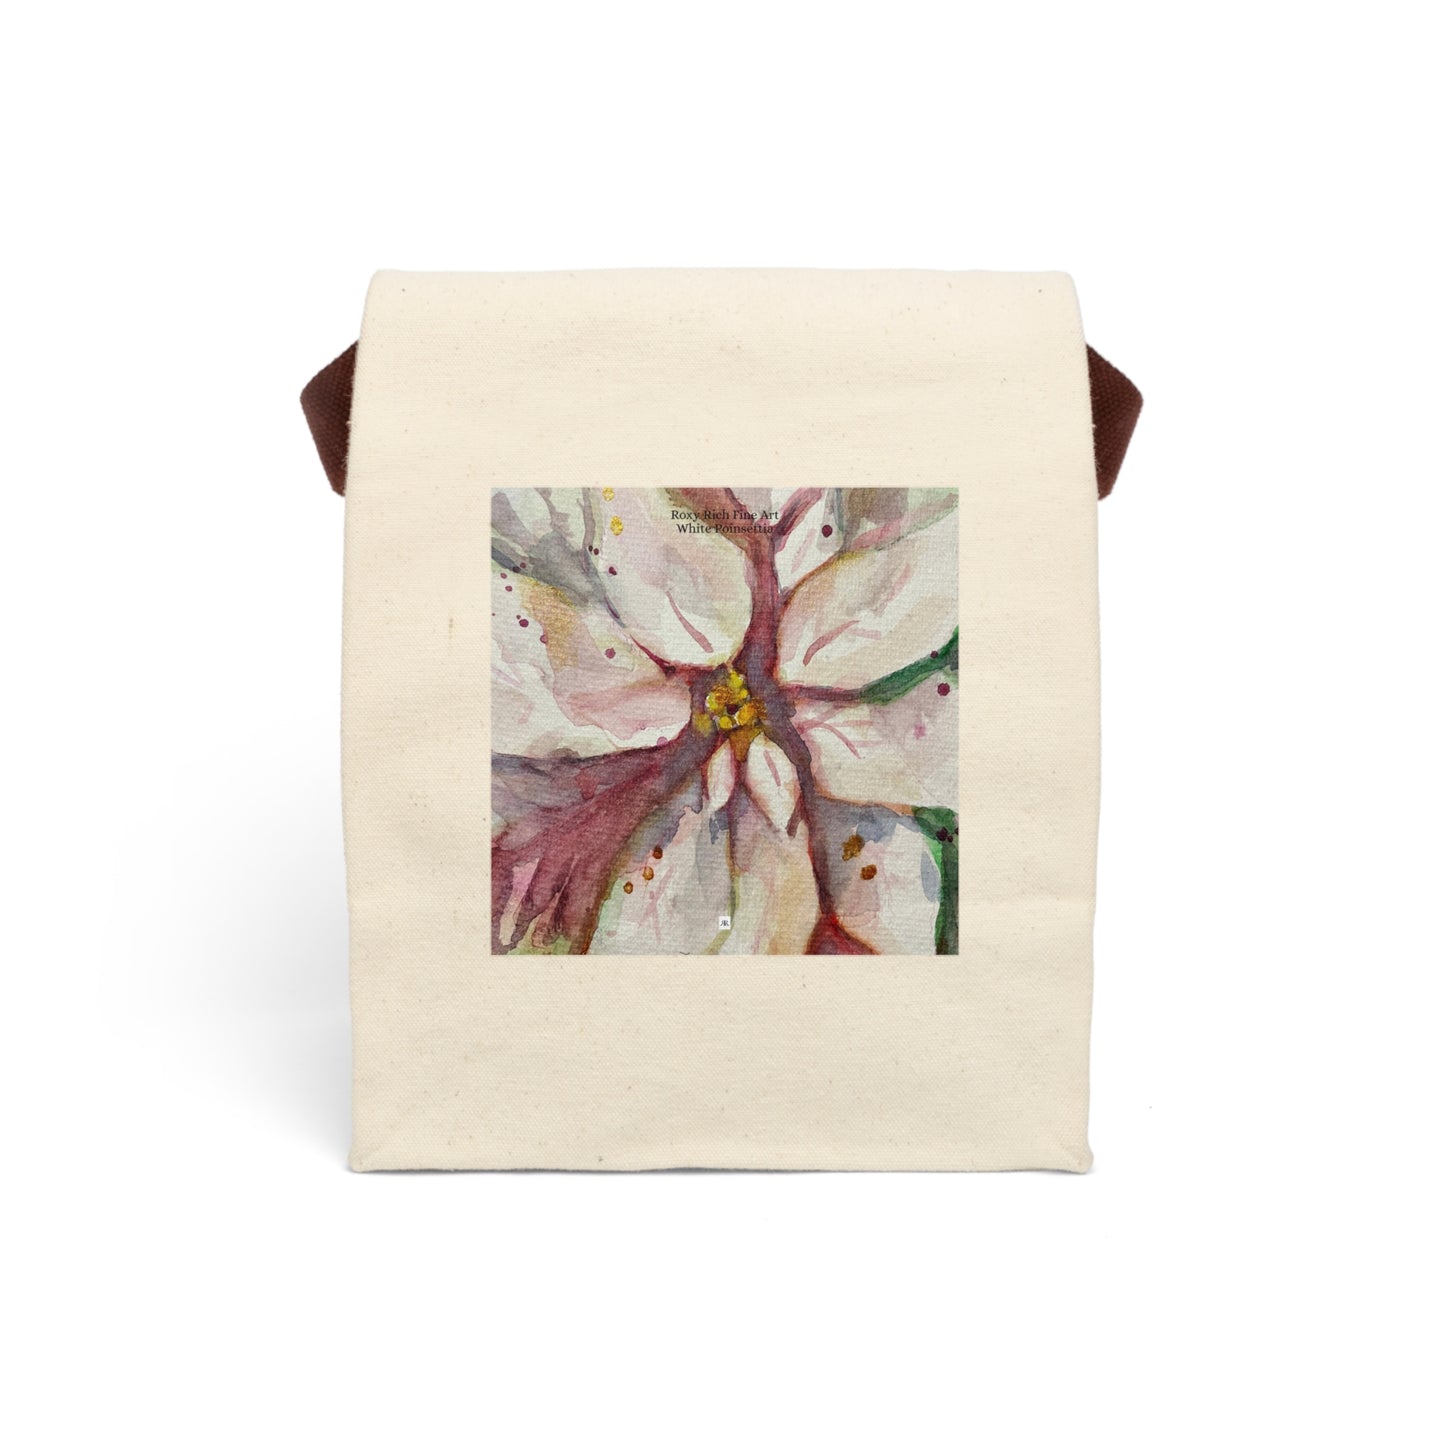 White Poinsettia Canvas Lunch Bag With Strap